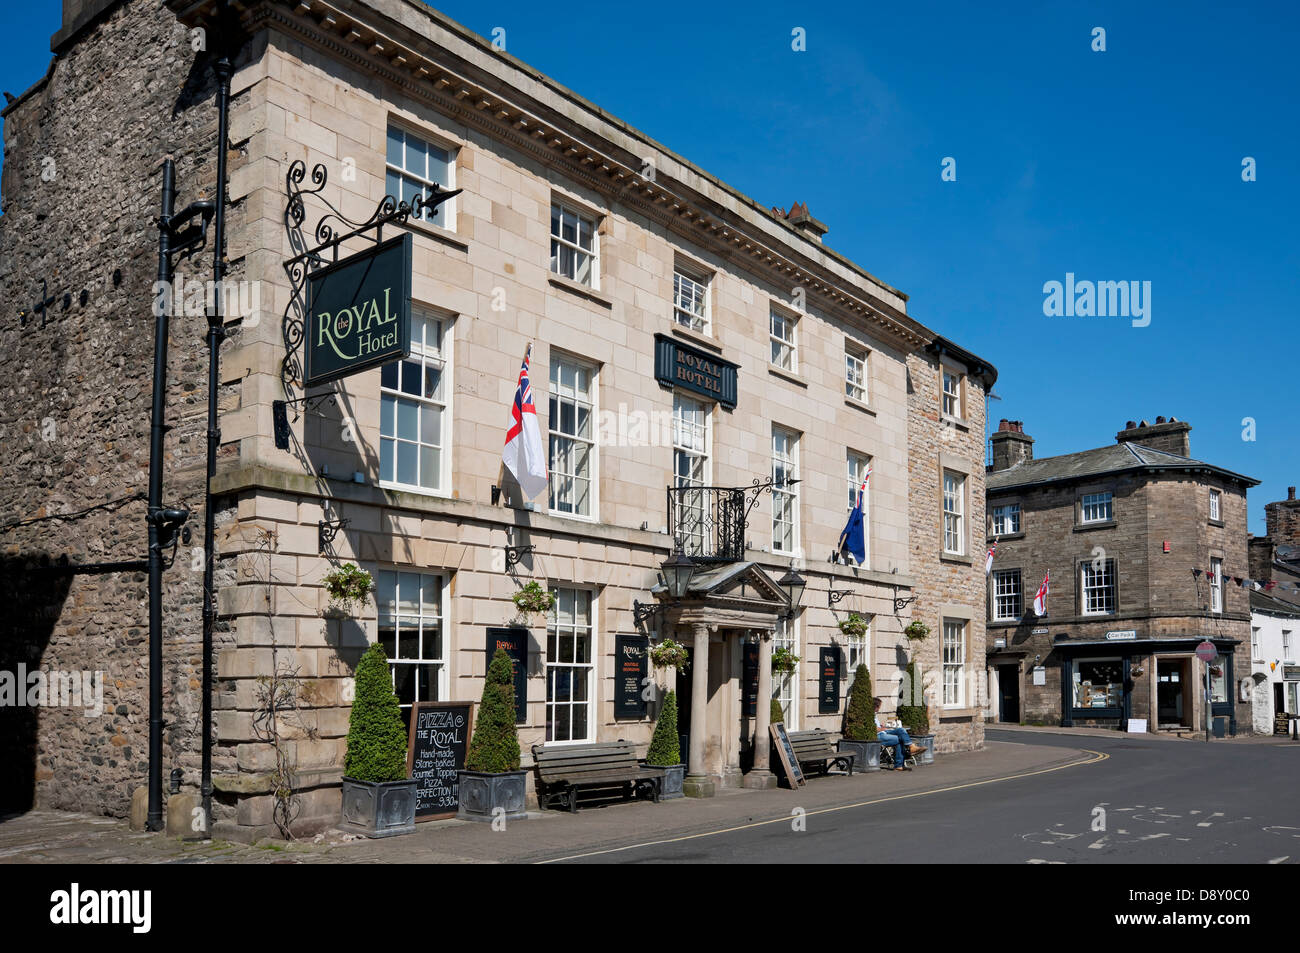 The Royal Hotel Georgian town house hotel Market Place Kirkby Lonsdale Cumbria England UK United Kingdom GB Great Britain Stock Photo